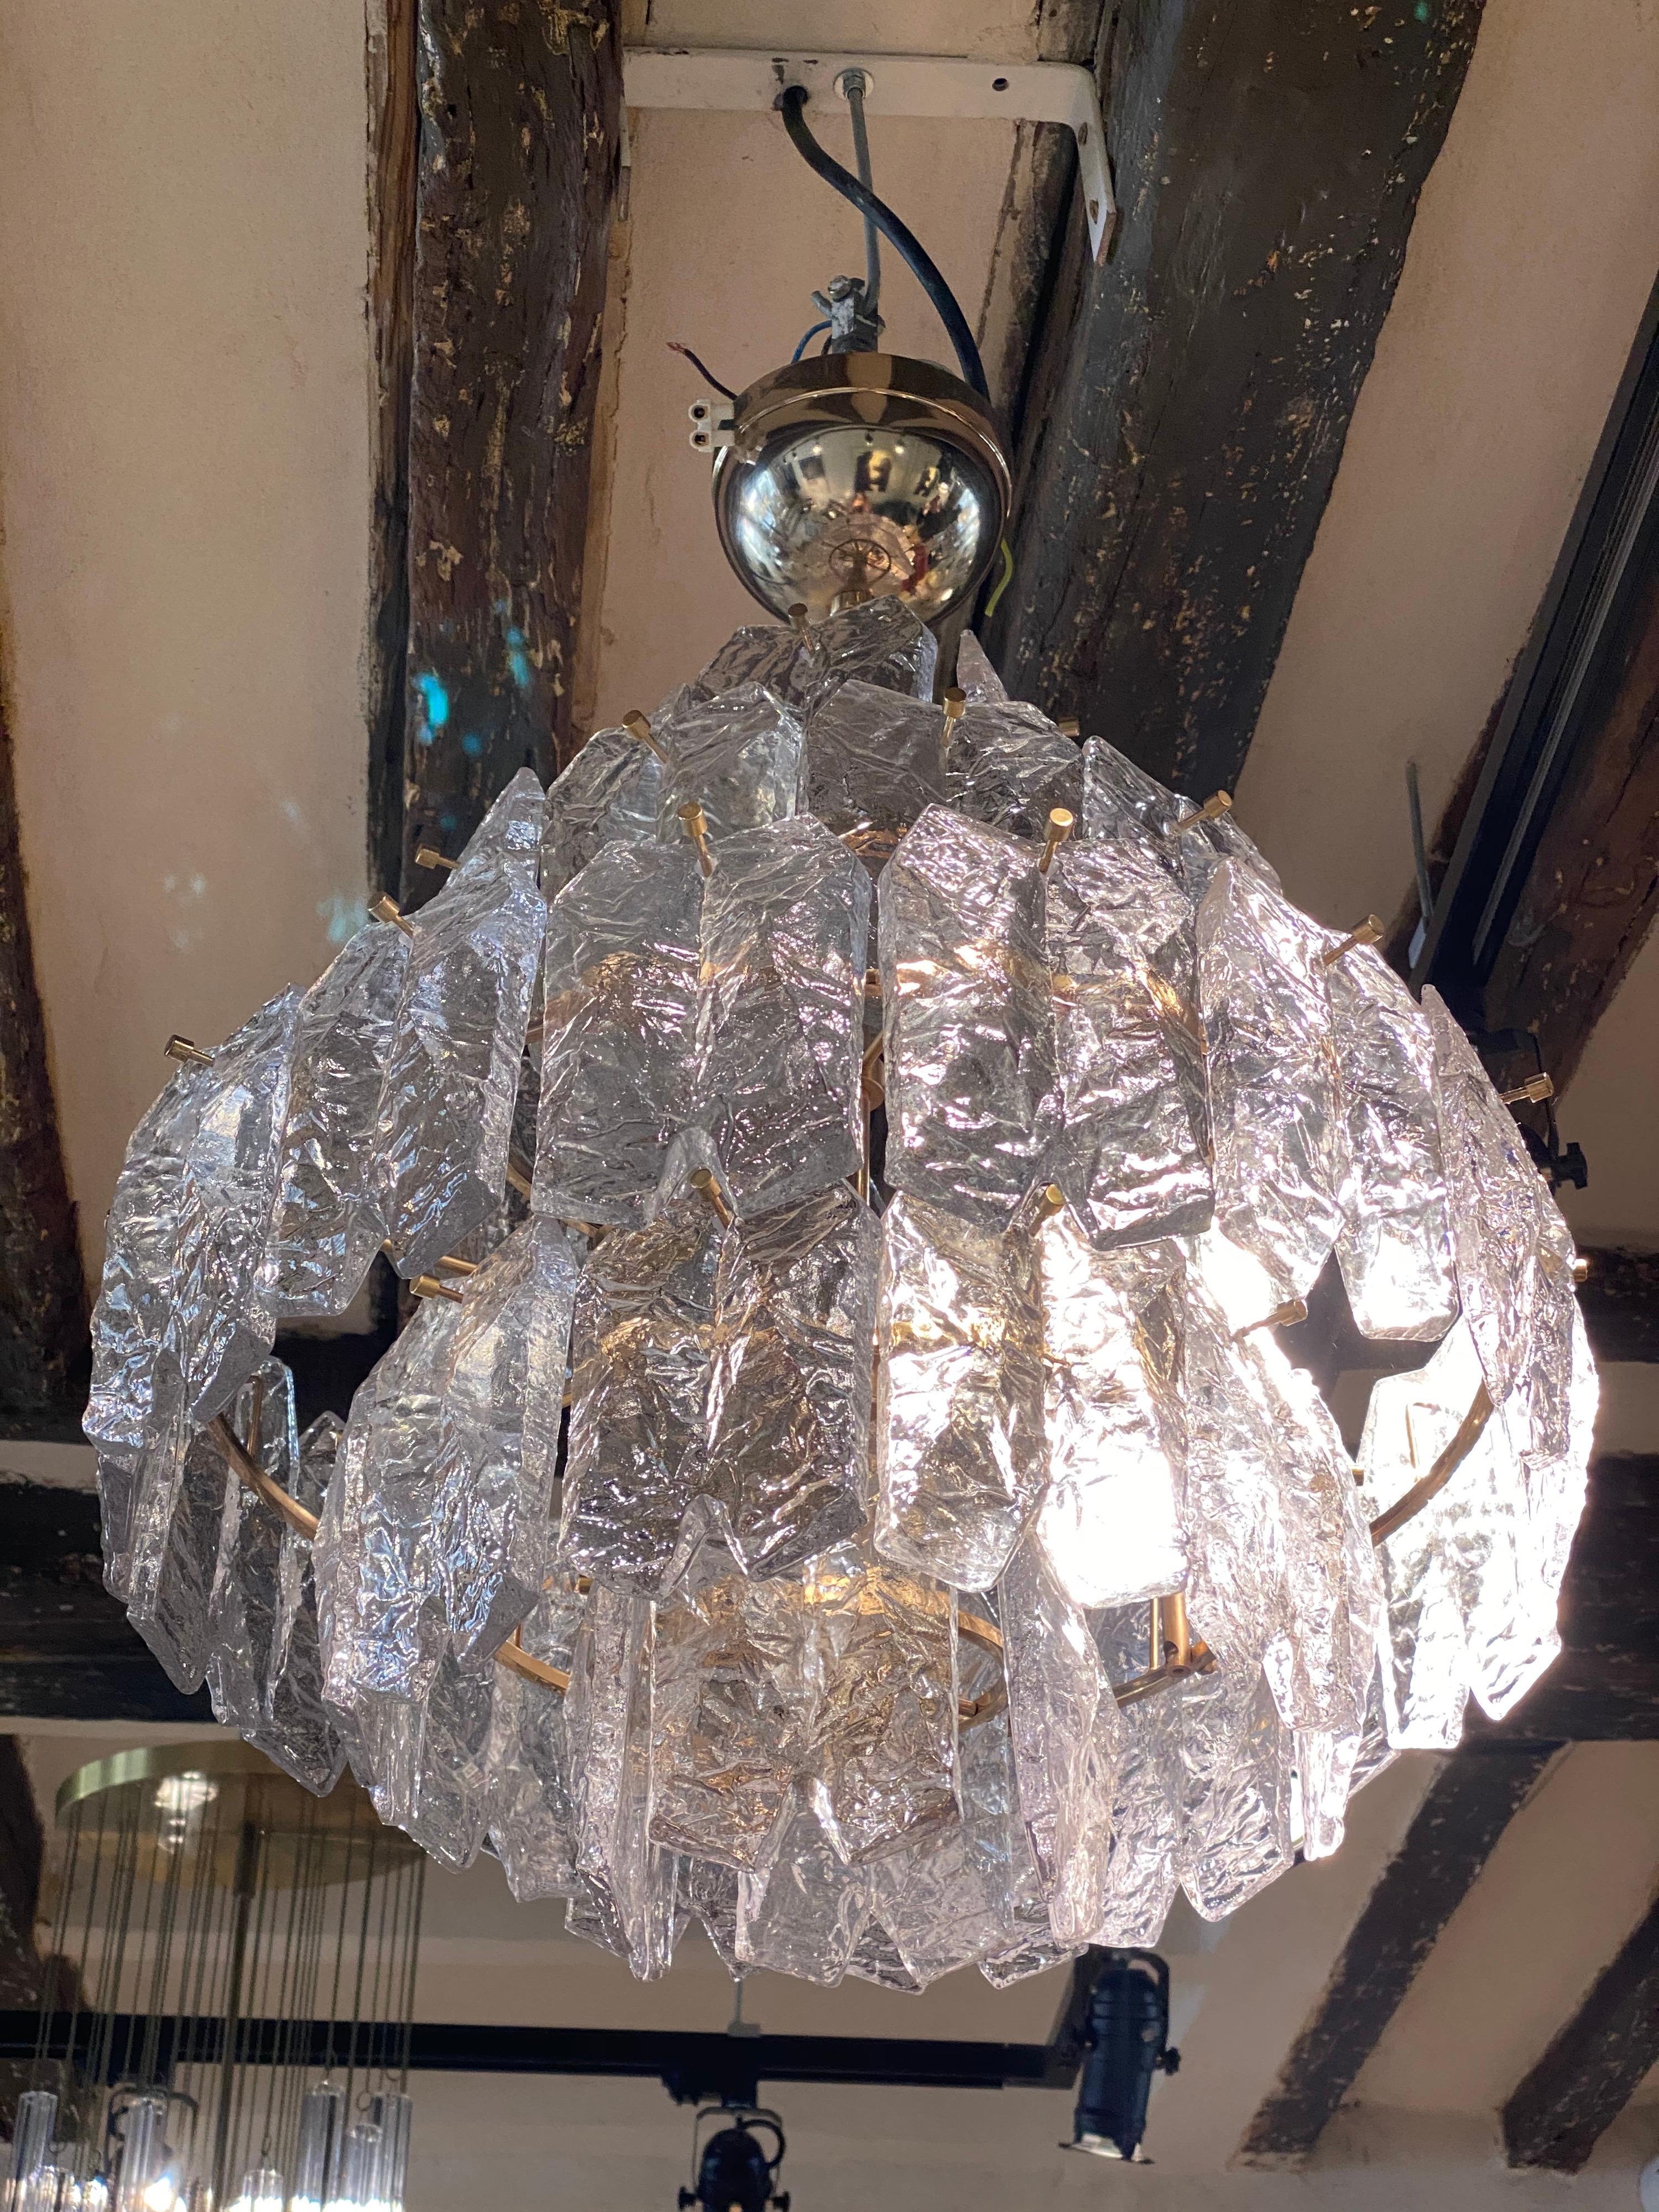 Superb chandelier by J.T Kalmar, on four floors, with its frosted glasses it gives a very beautiful effect, of an elegance and an exceptional quality. I have enlarged the photos for the minimal shards that are not visible once the chandelier is